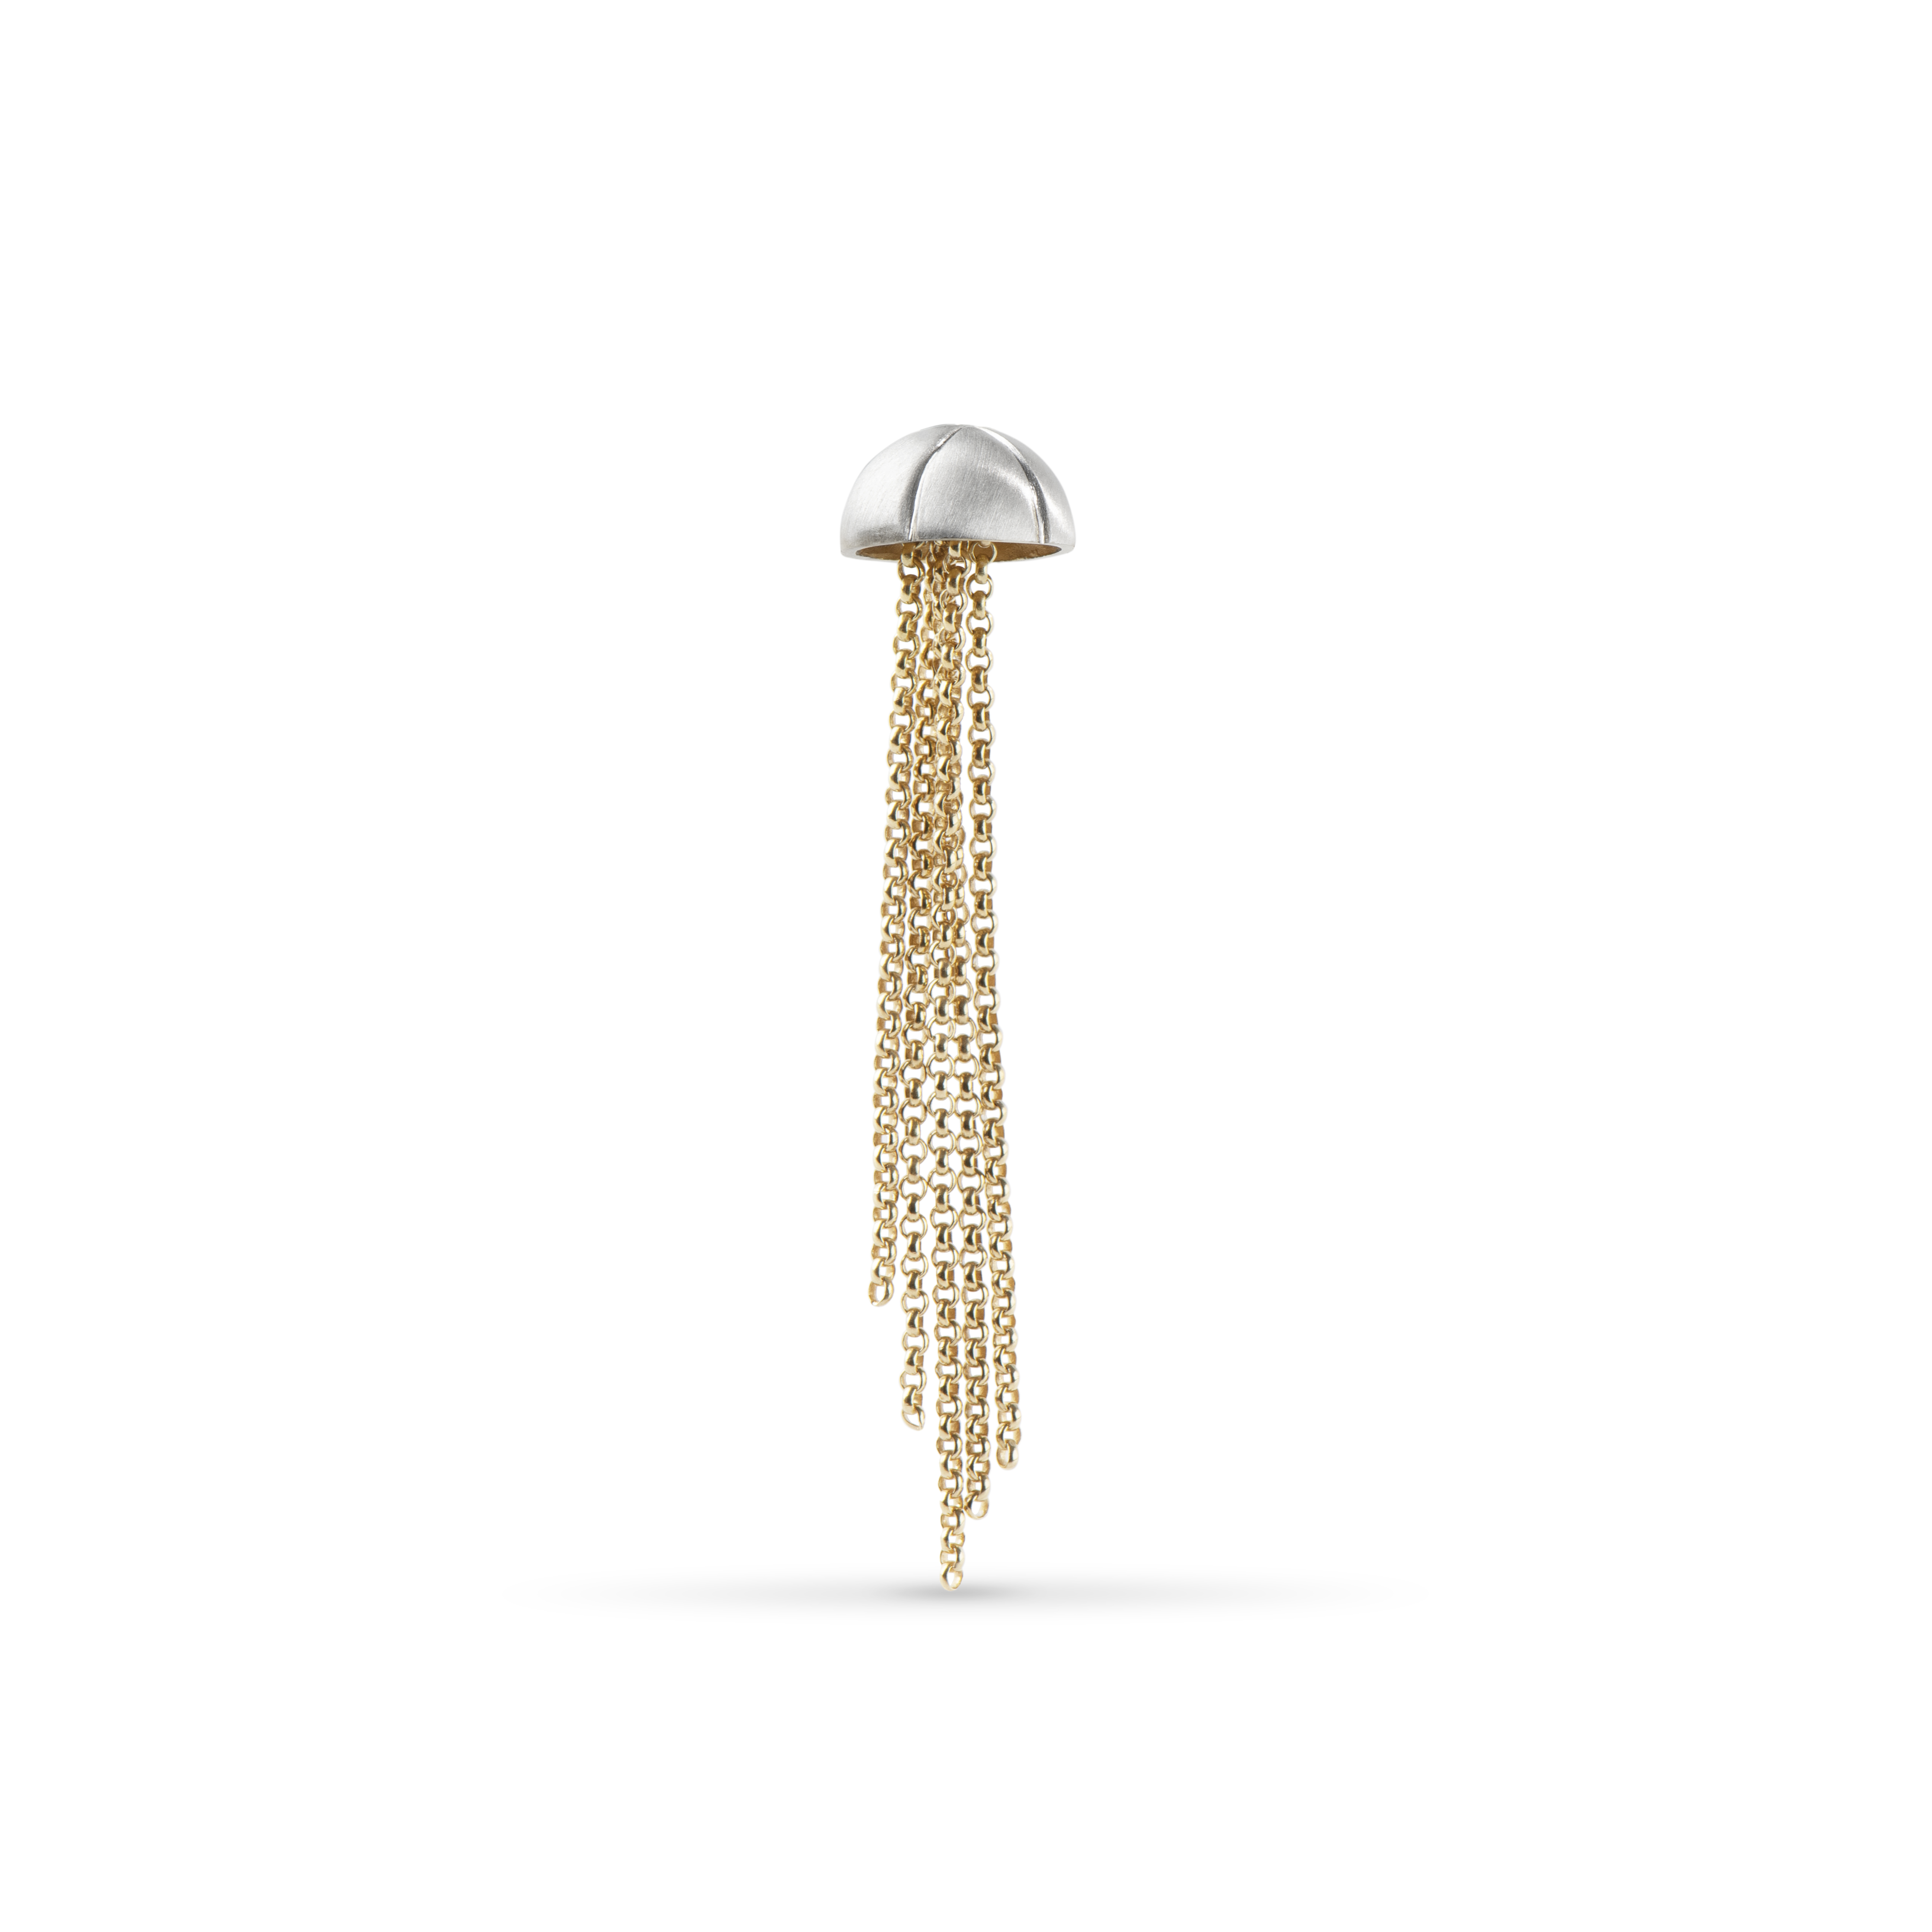 Jellyfish Earring - Silver and Gold - Image 1